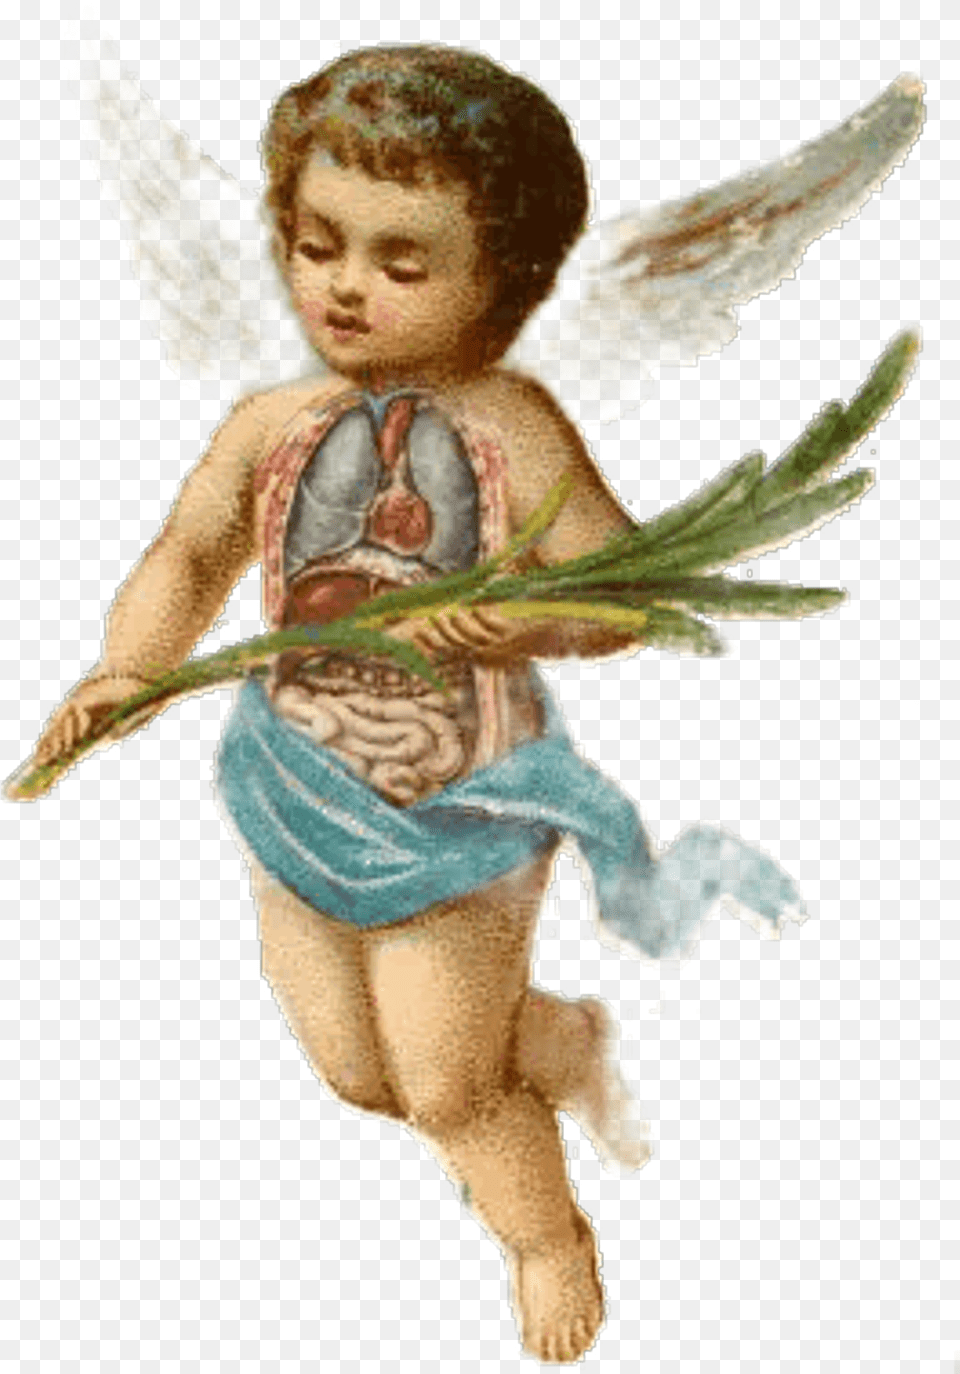 Download Cherub Sticker Baby Boy Angels Image With No Christmas Angel Illustration Vintage, Person, Face, Head, Cupid Free Transparent Png